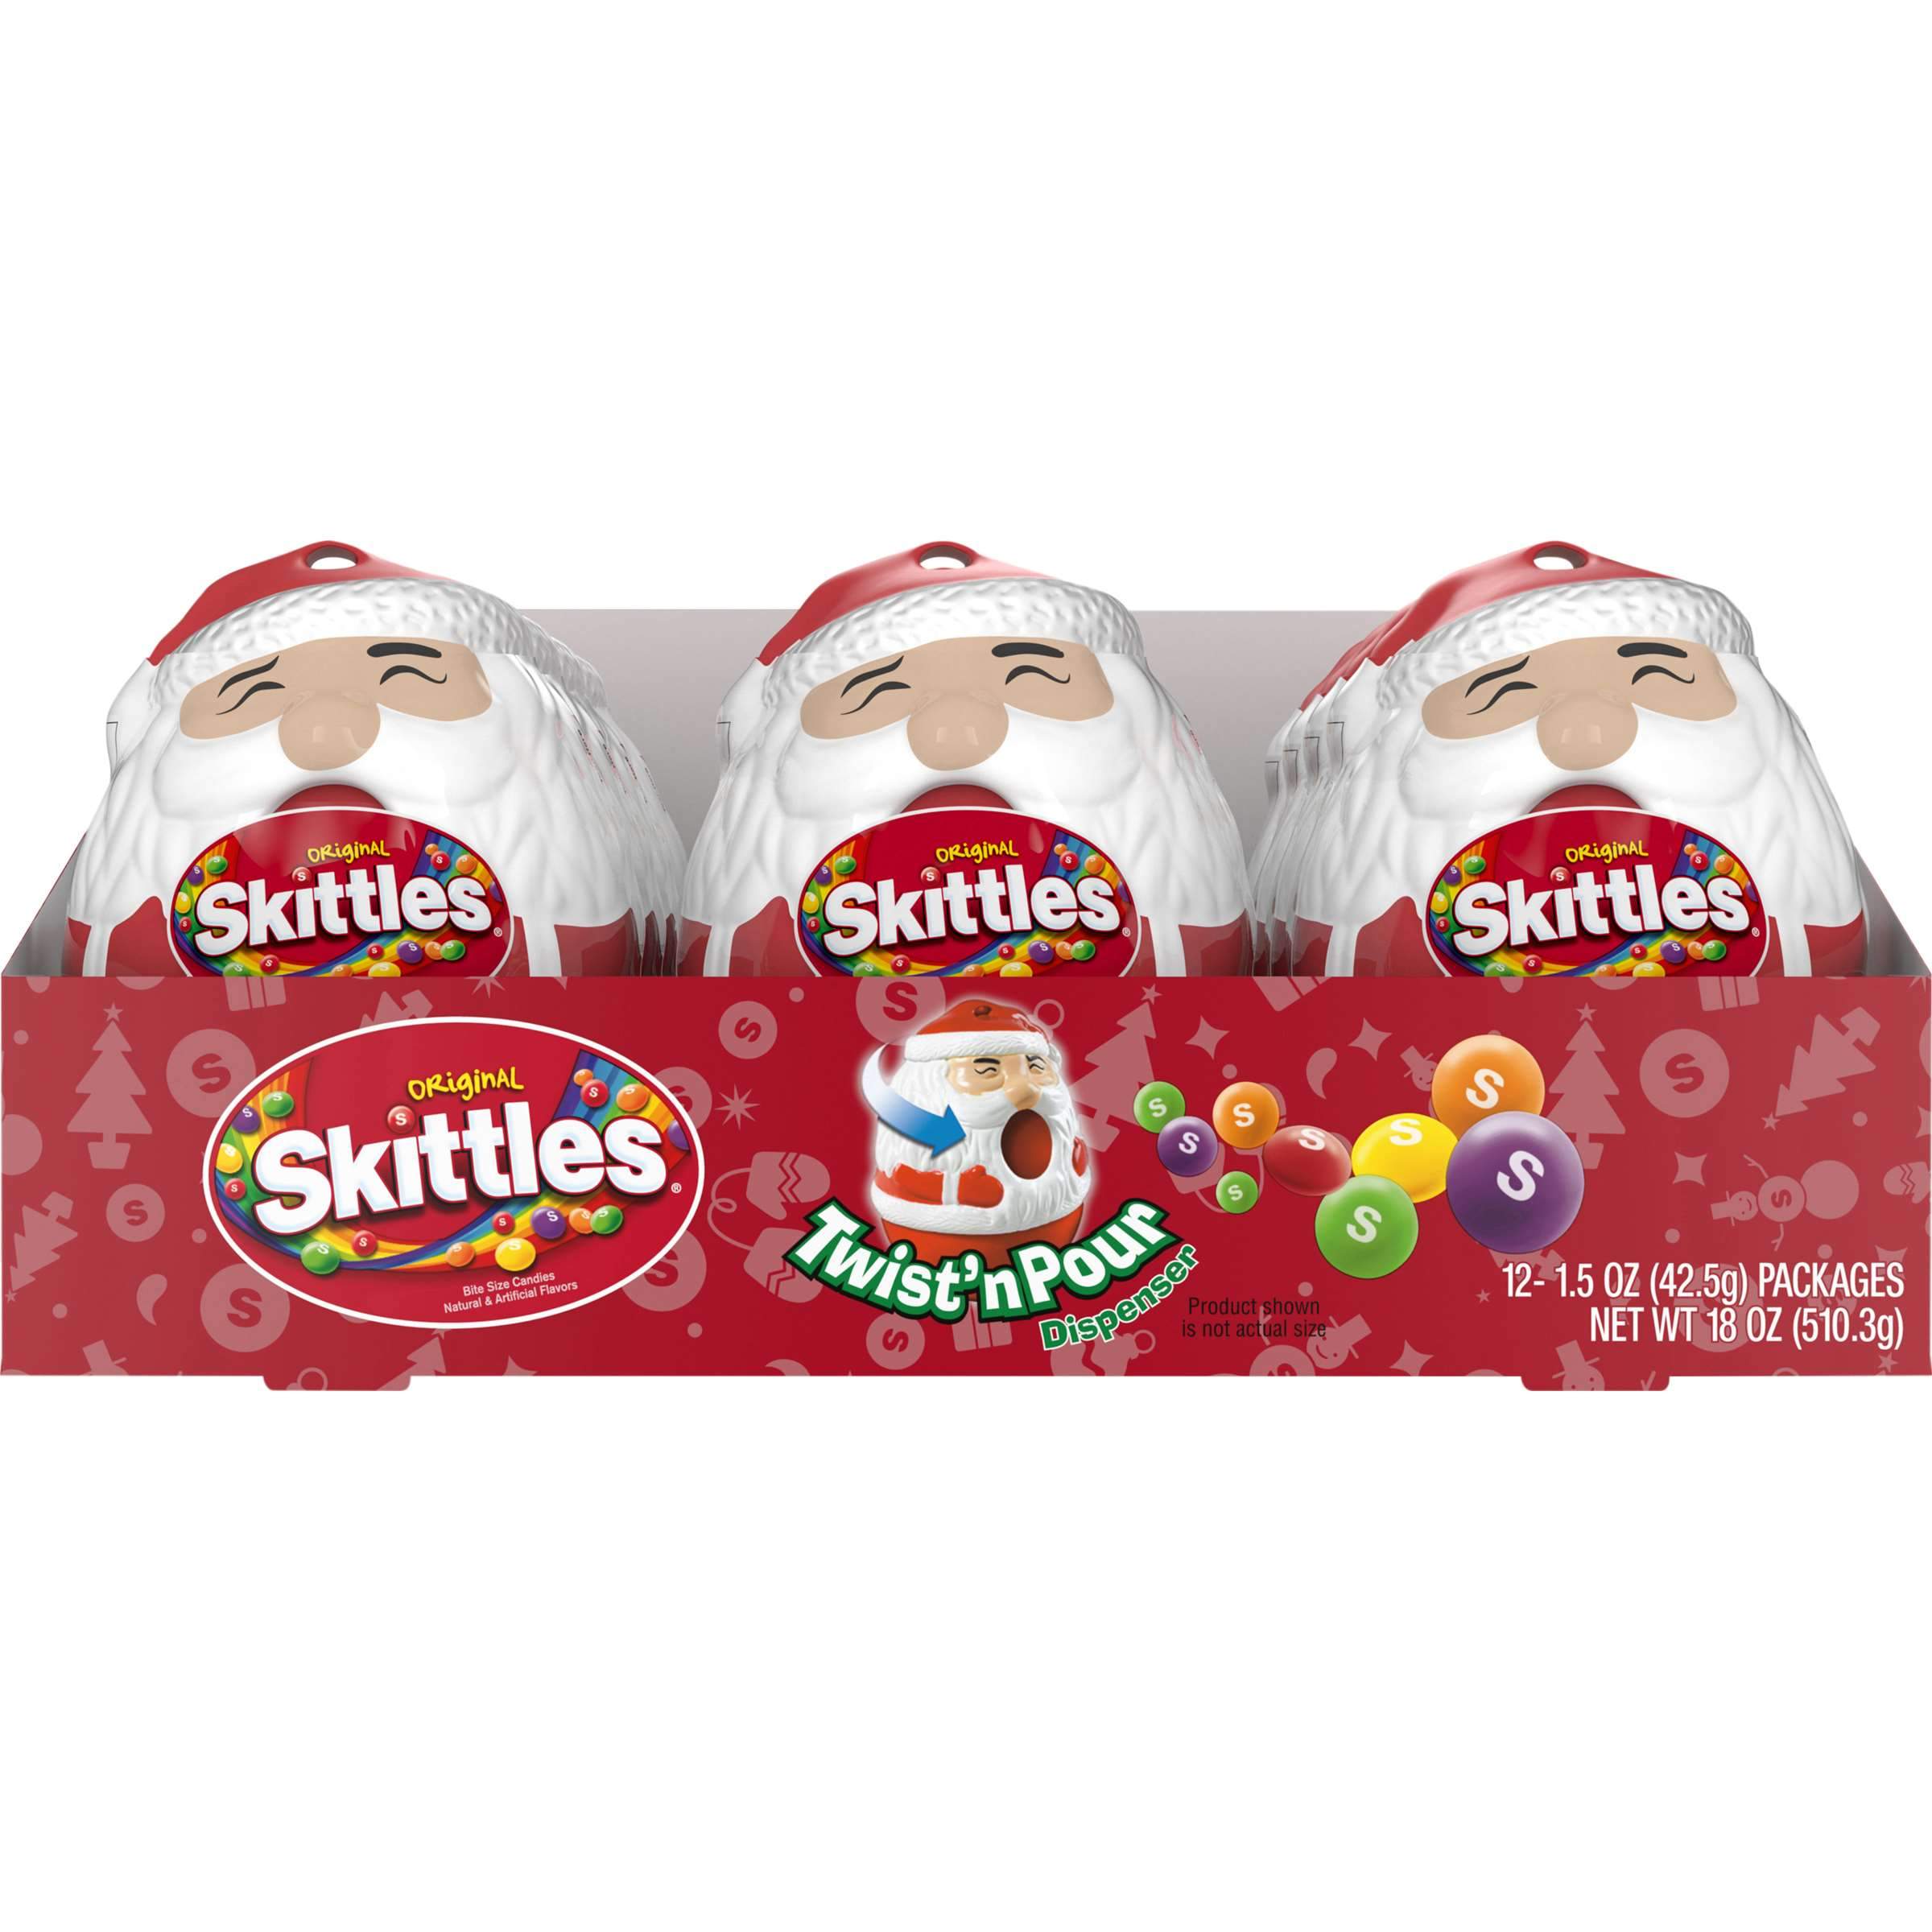 Skittle Holiday Skittles Twist & Pour - Original 1.5 Oz-12 Count 